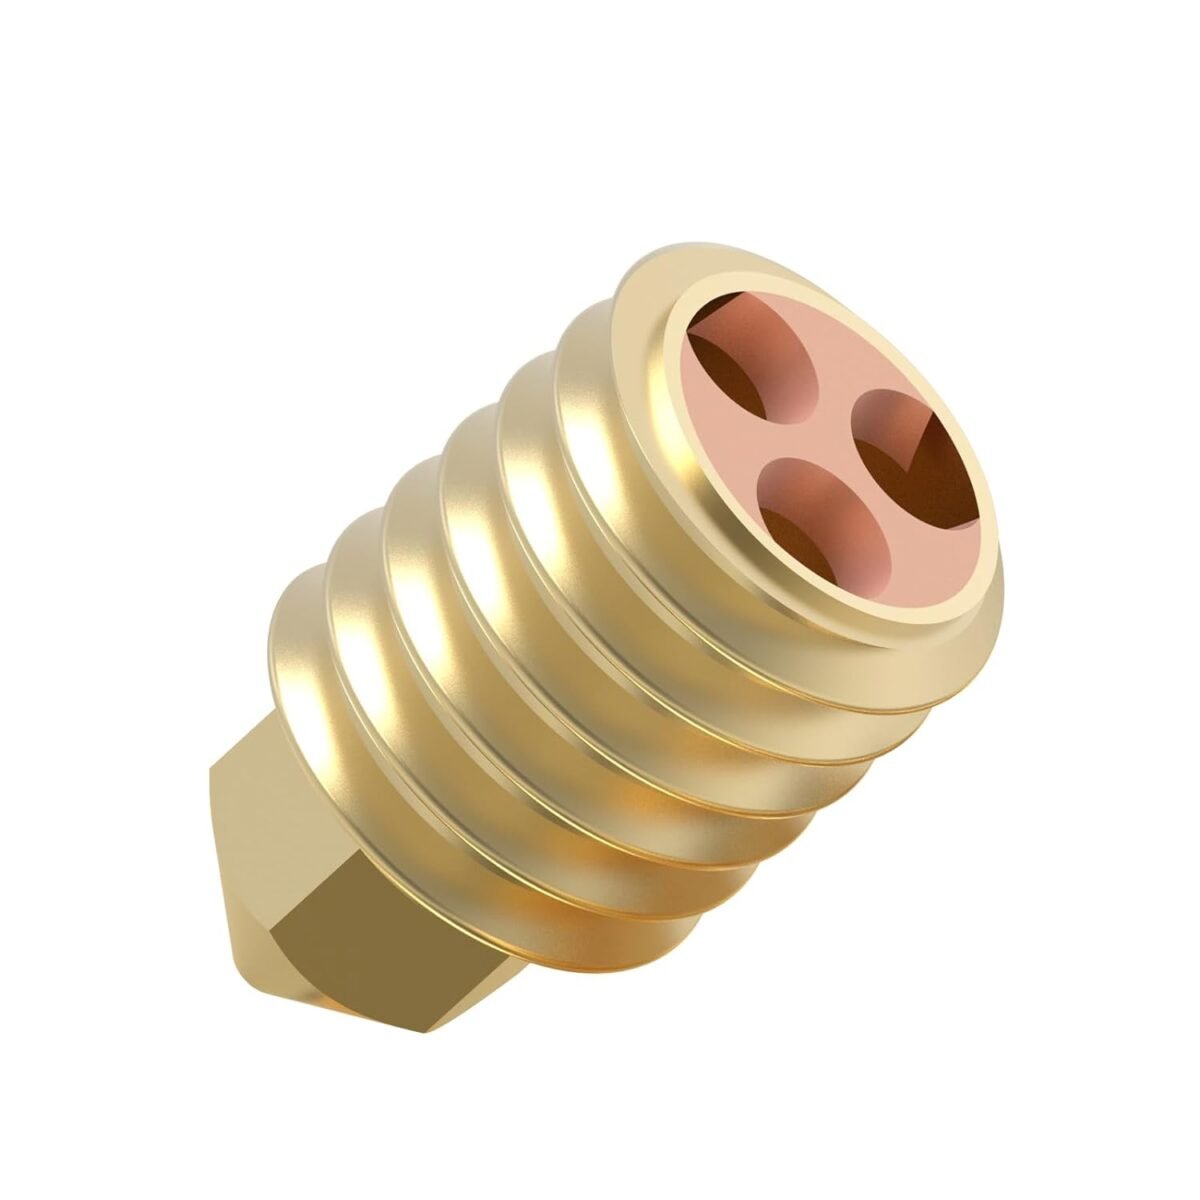 Bambu lab cht nozzle size 0.4mm brass nozzle for Bambu Lab X1 and P1P for 1.75 Filament